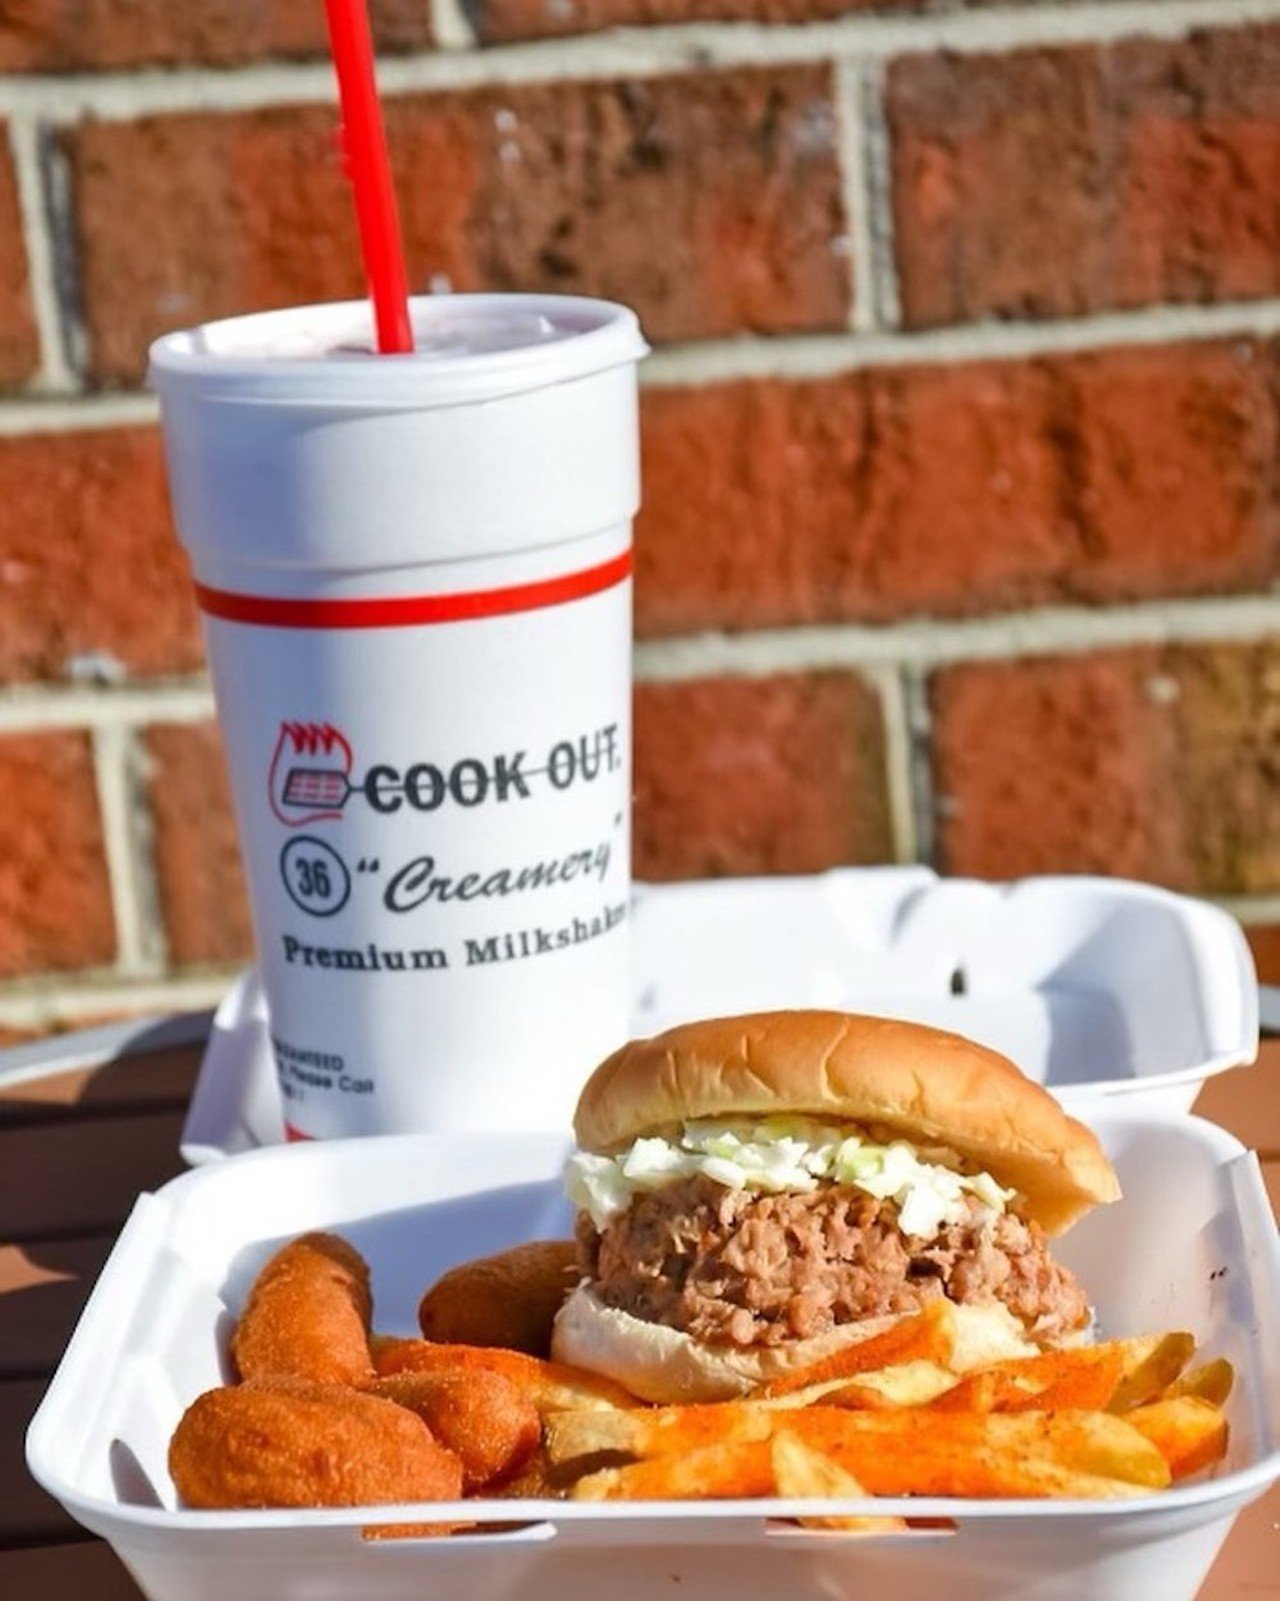 Cook Out
Founded in Greensboro, in 1989, Cook Out was a chain that operated only in North Carolina until 2010 when it expanded into South Carolina. And in the last 12 years, it’s grown considerably and now has locations throughout the southern United States, including in nearby Lexington. Cook Out prides itself on its char-grilled hamburgers and chicken sandwiches, which you can get in a range of “styles,” like the Cook Out Style burger, which comes with homemade chili, slaw, mustard and onion or the Cajun Style chicken sandwich, which comes with Cajun seasoning, Texas Pete hot sauce, lettuce tomato and mayo. Cook Out’s menu also includes hot dogs, hush puppies, BBQ sandwiches and plates and more. You can also do a Tray, or a combo, and get an entree, two sides and a drink. And we need to take a second to talk about their shake menu: Their list comes with nearly 40 flavors with everything from your classic vanilla or banana to five different kinds of cheesecake flavors, red cherry and pineapple.